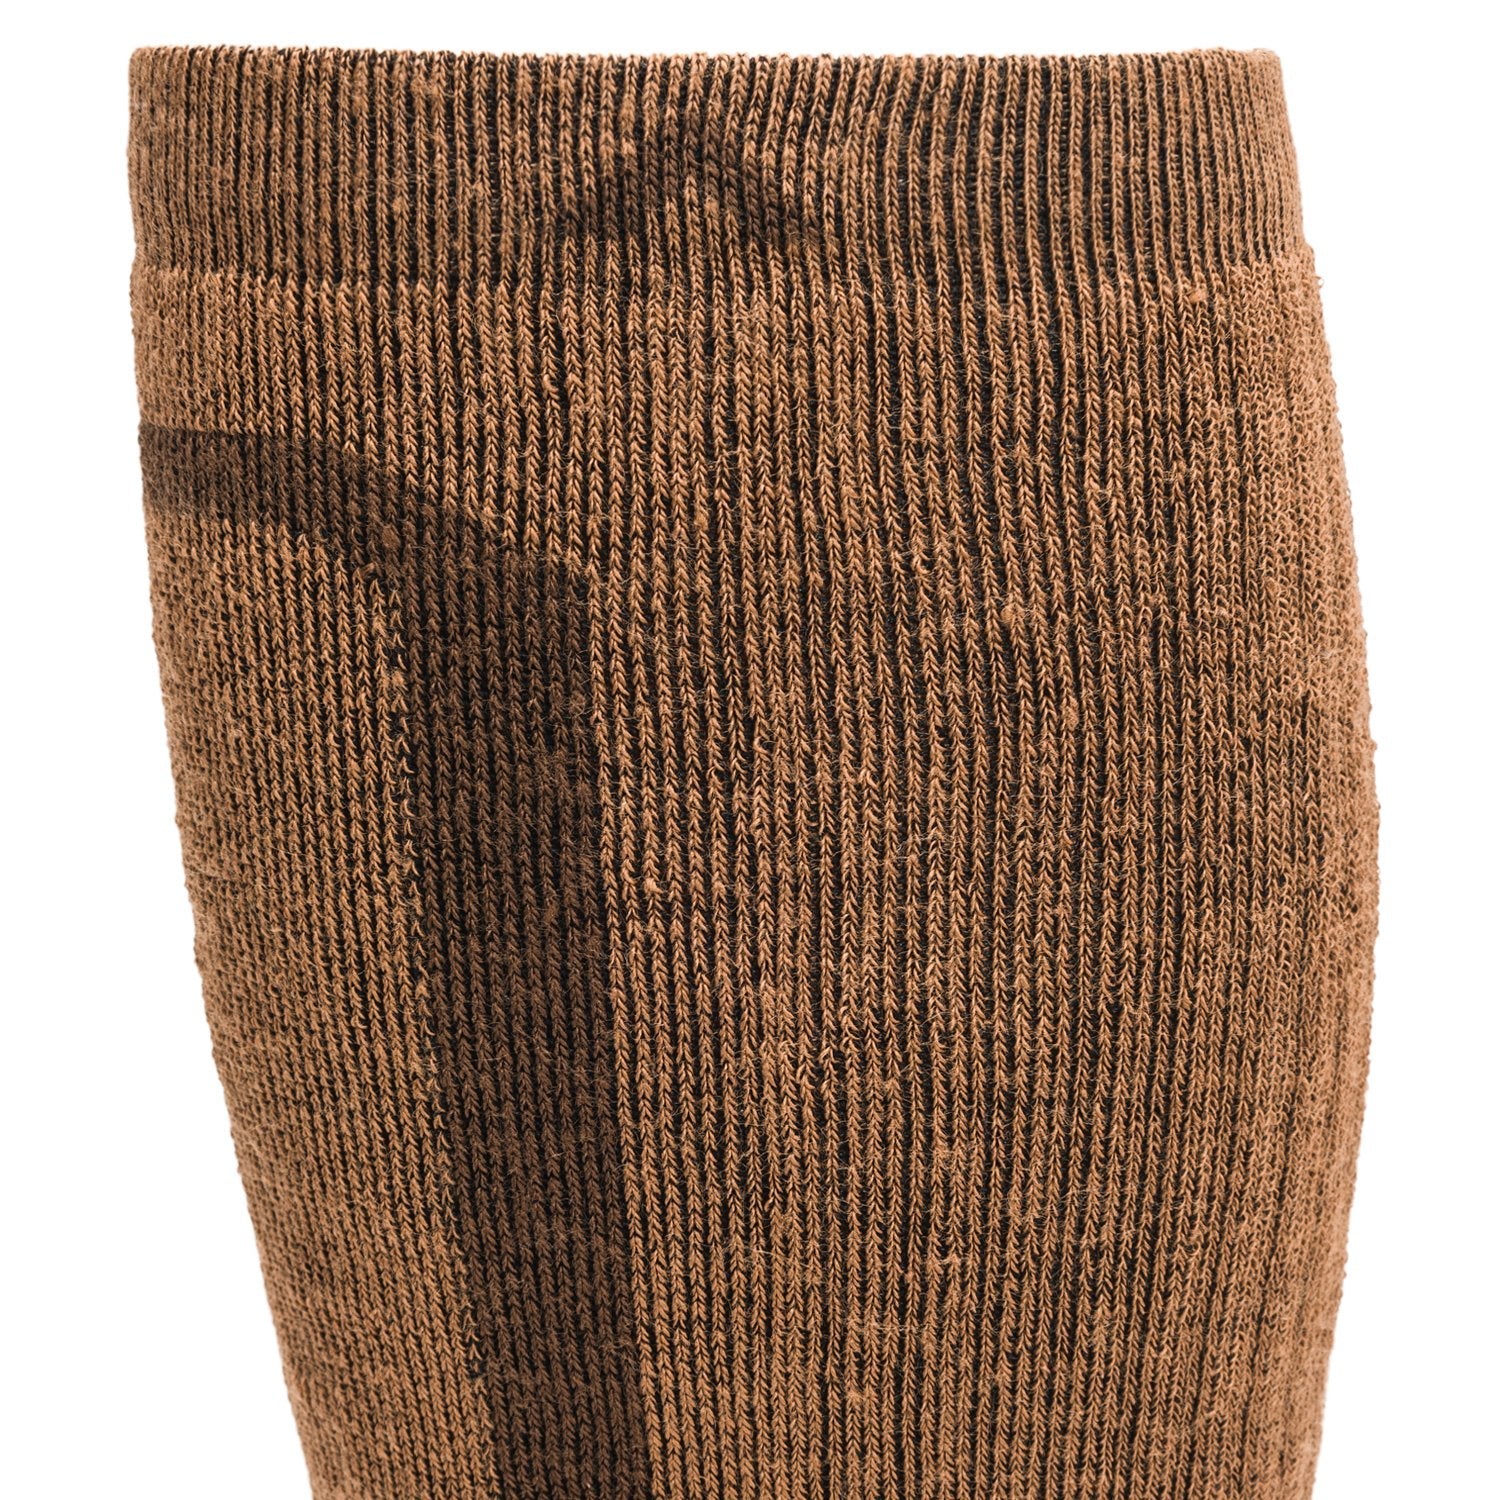 No Fly Zone Outdoor Midweight Over-The-Calf Sock - Coyote Brown cuff perspective - made in The USA Wigwam Socks